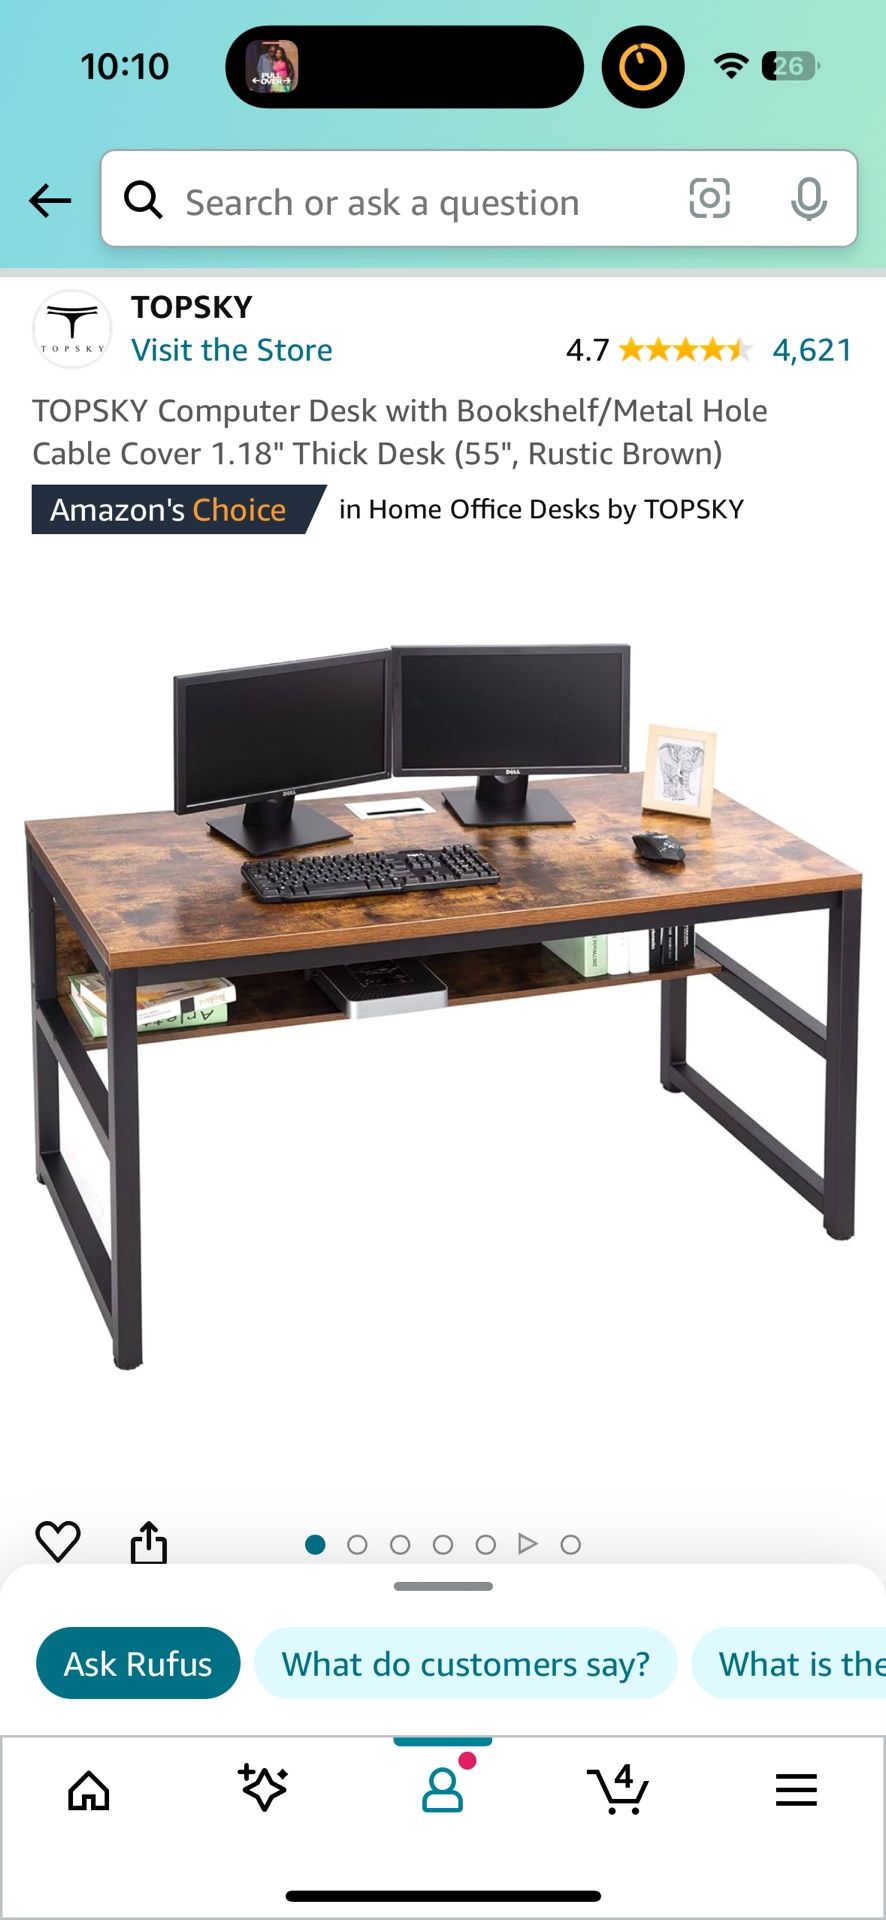 55” Desk With Bookshelf & Metal Cover Cable Hole - Amazon Topsky